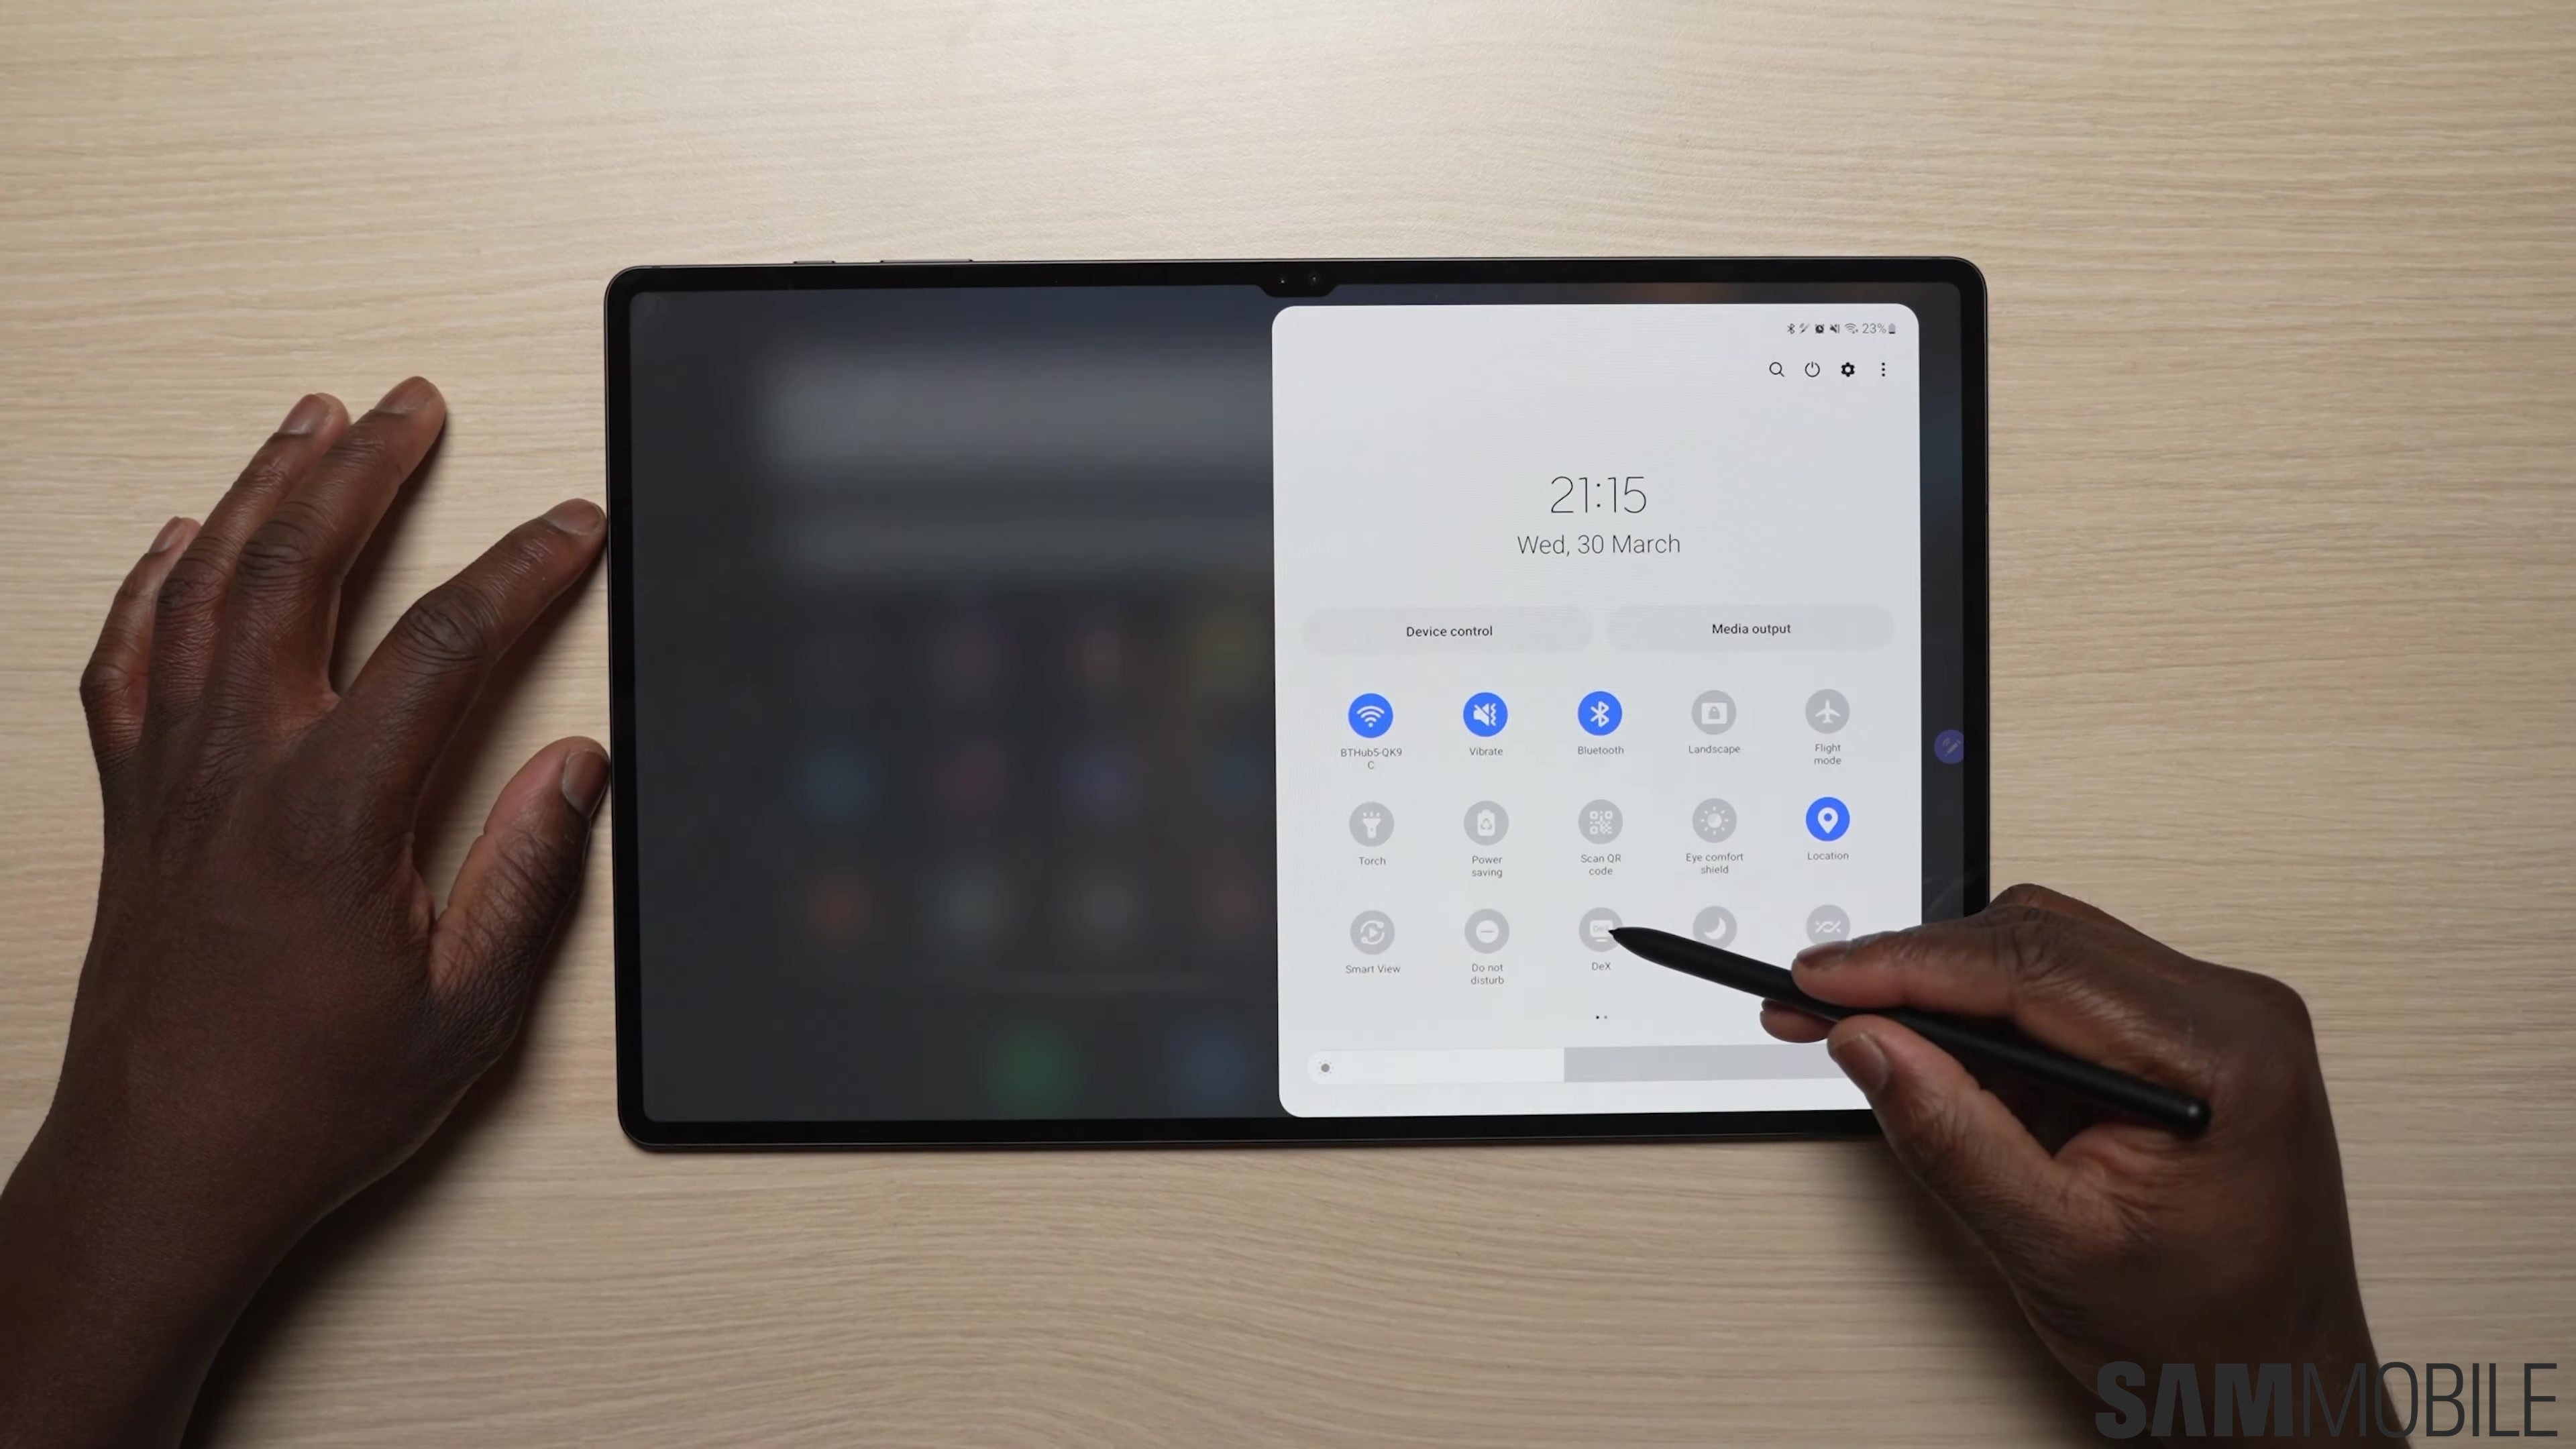 User Guide] Galaxy Tab S8: The Perfect Tool for Balancing Life